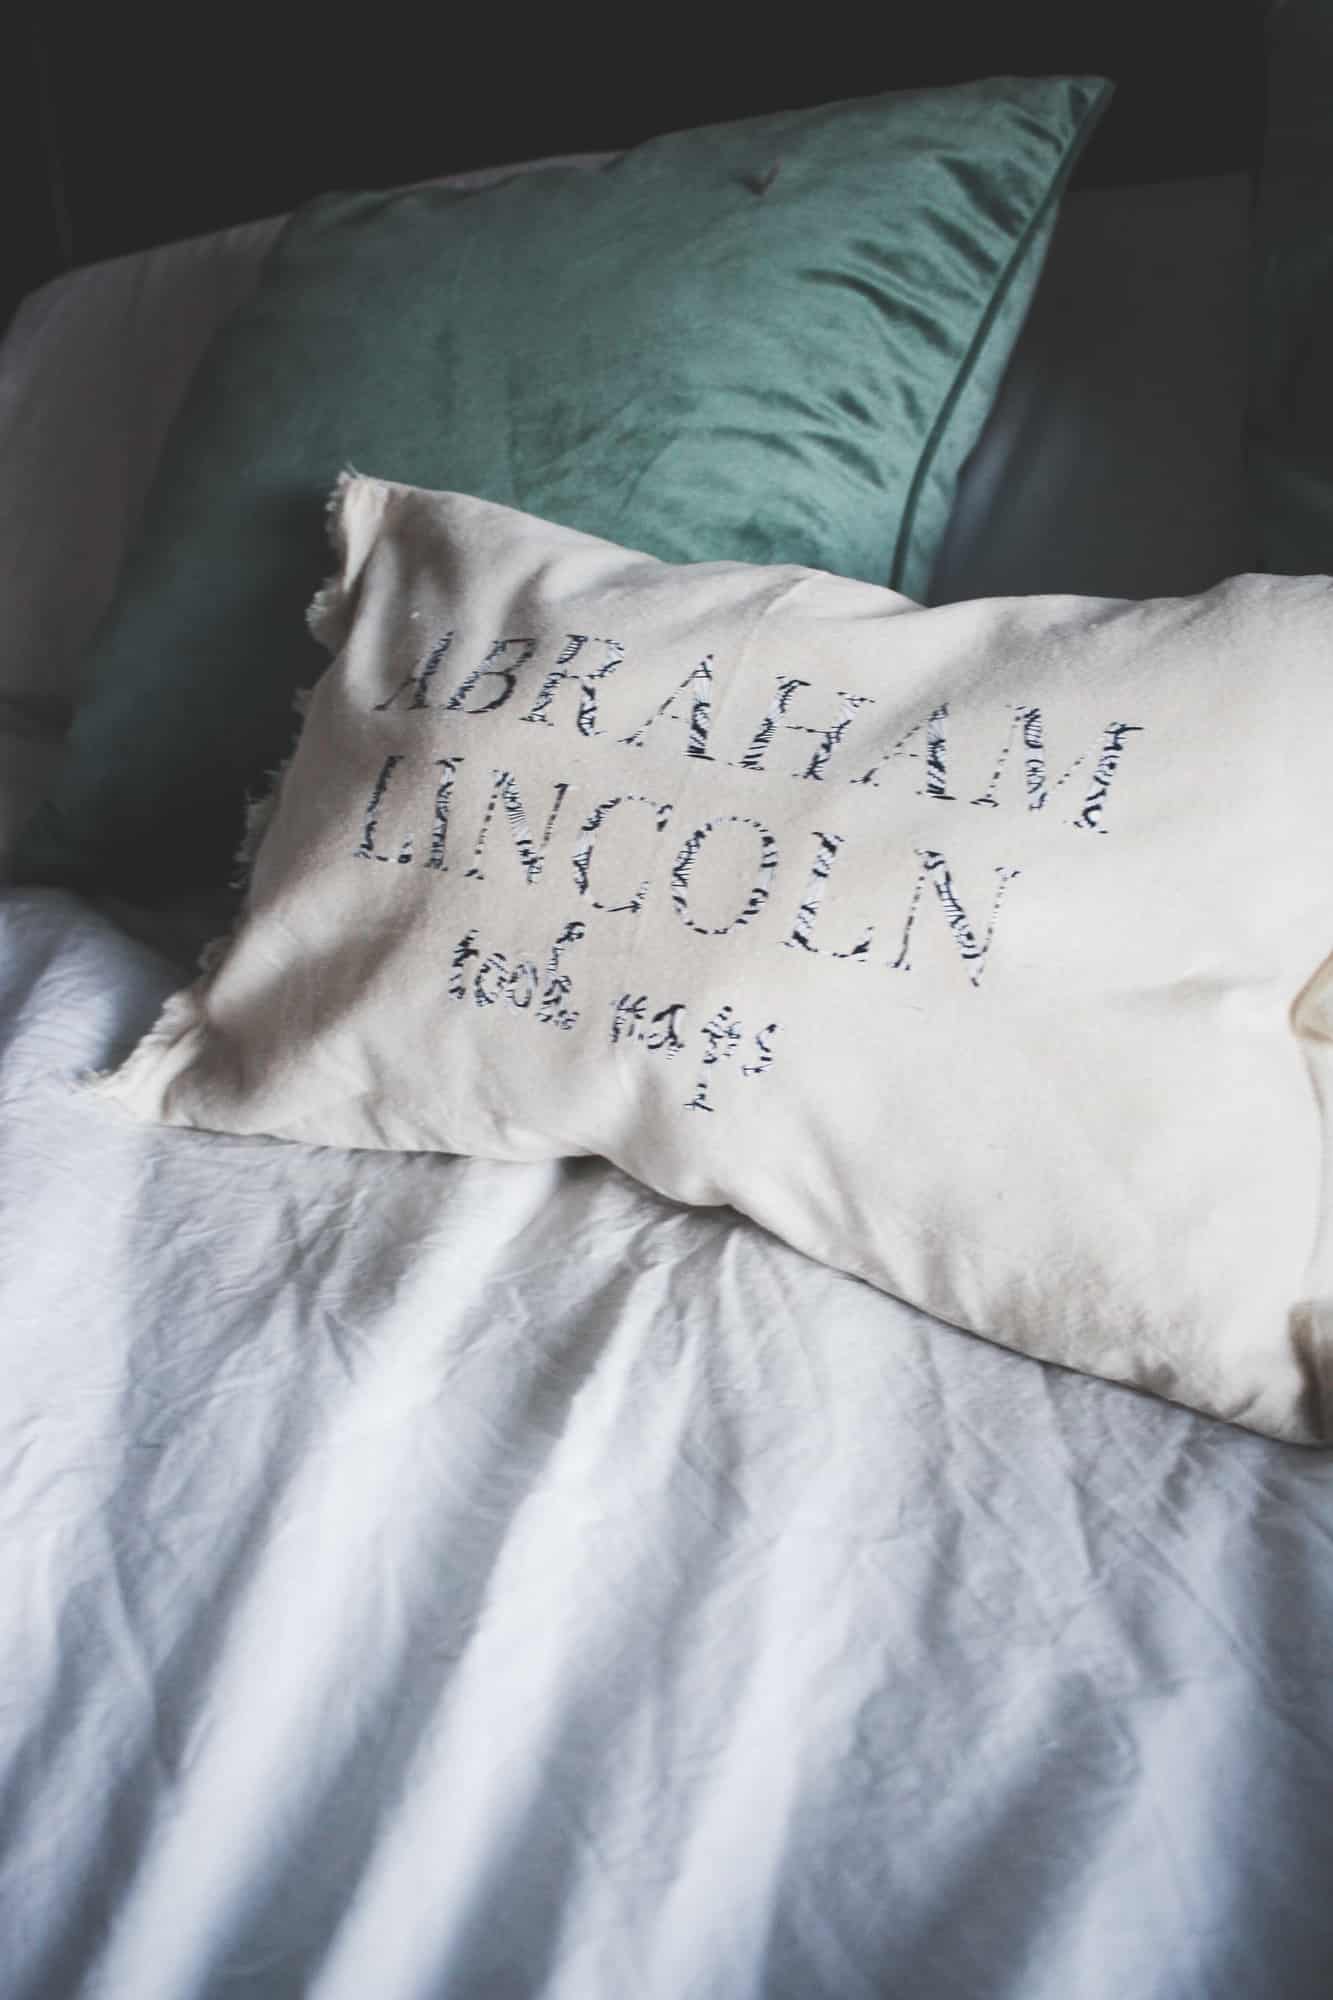 Cricut's new patterned iron on looks fantastic as text and shapes! I made a decorative pillow out of drawstring bags and love how it turned out.